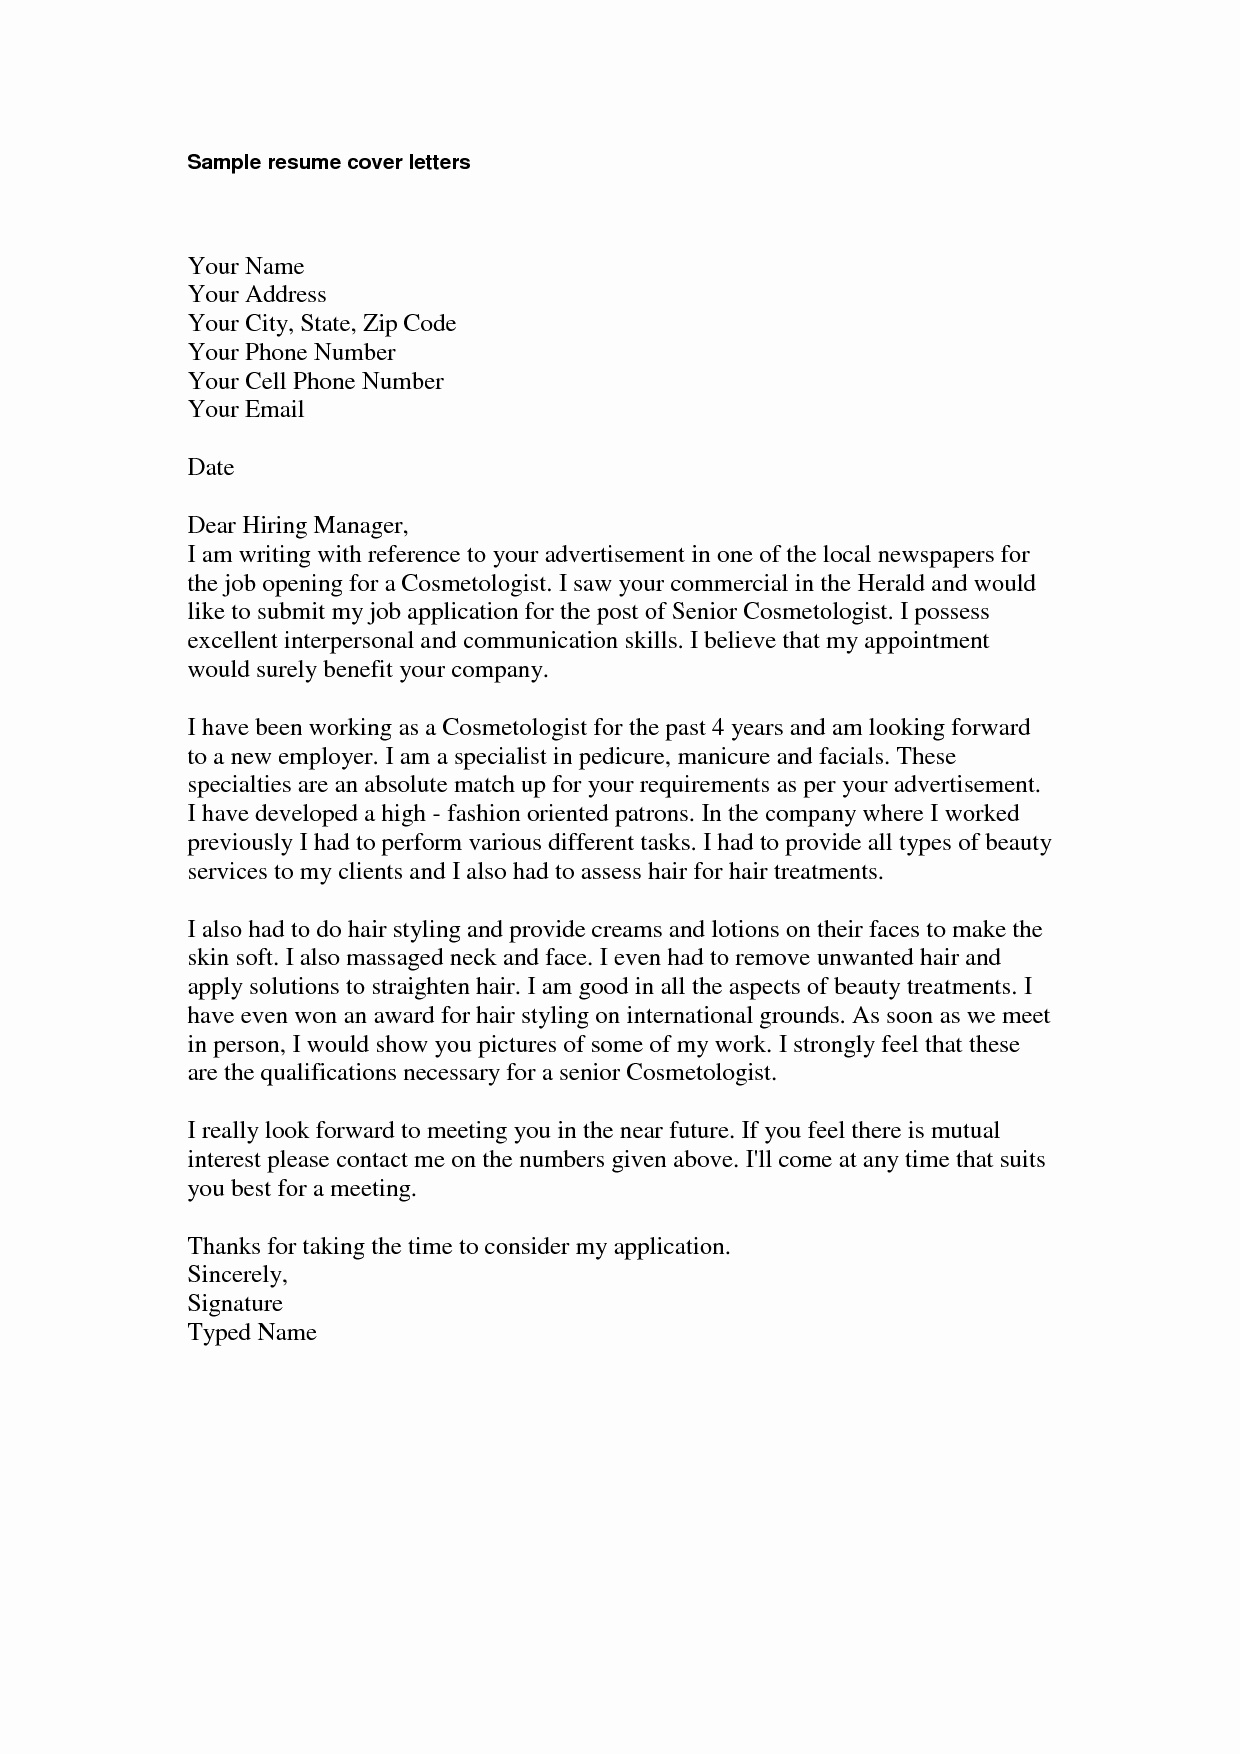 Cosmetologist Cover Letter Template - Sample Cosmetology Resume Cosmetology Cover Letter Examples Best